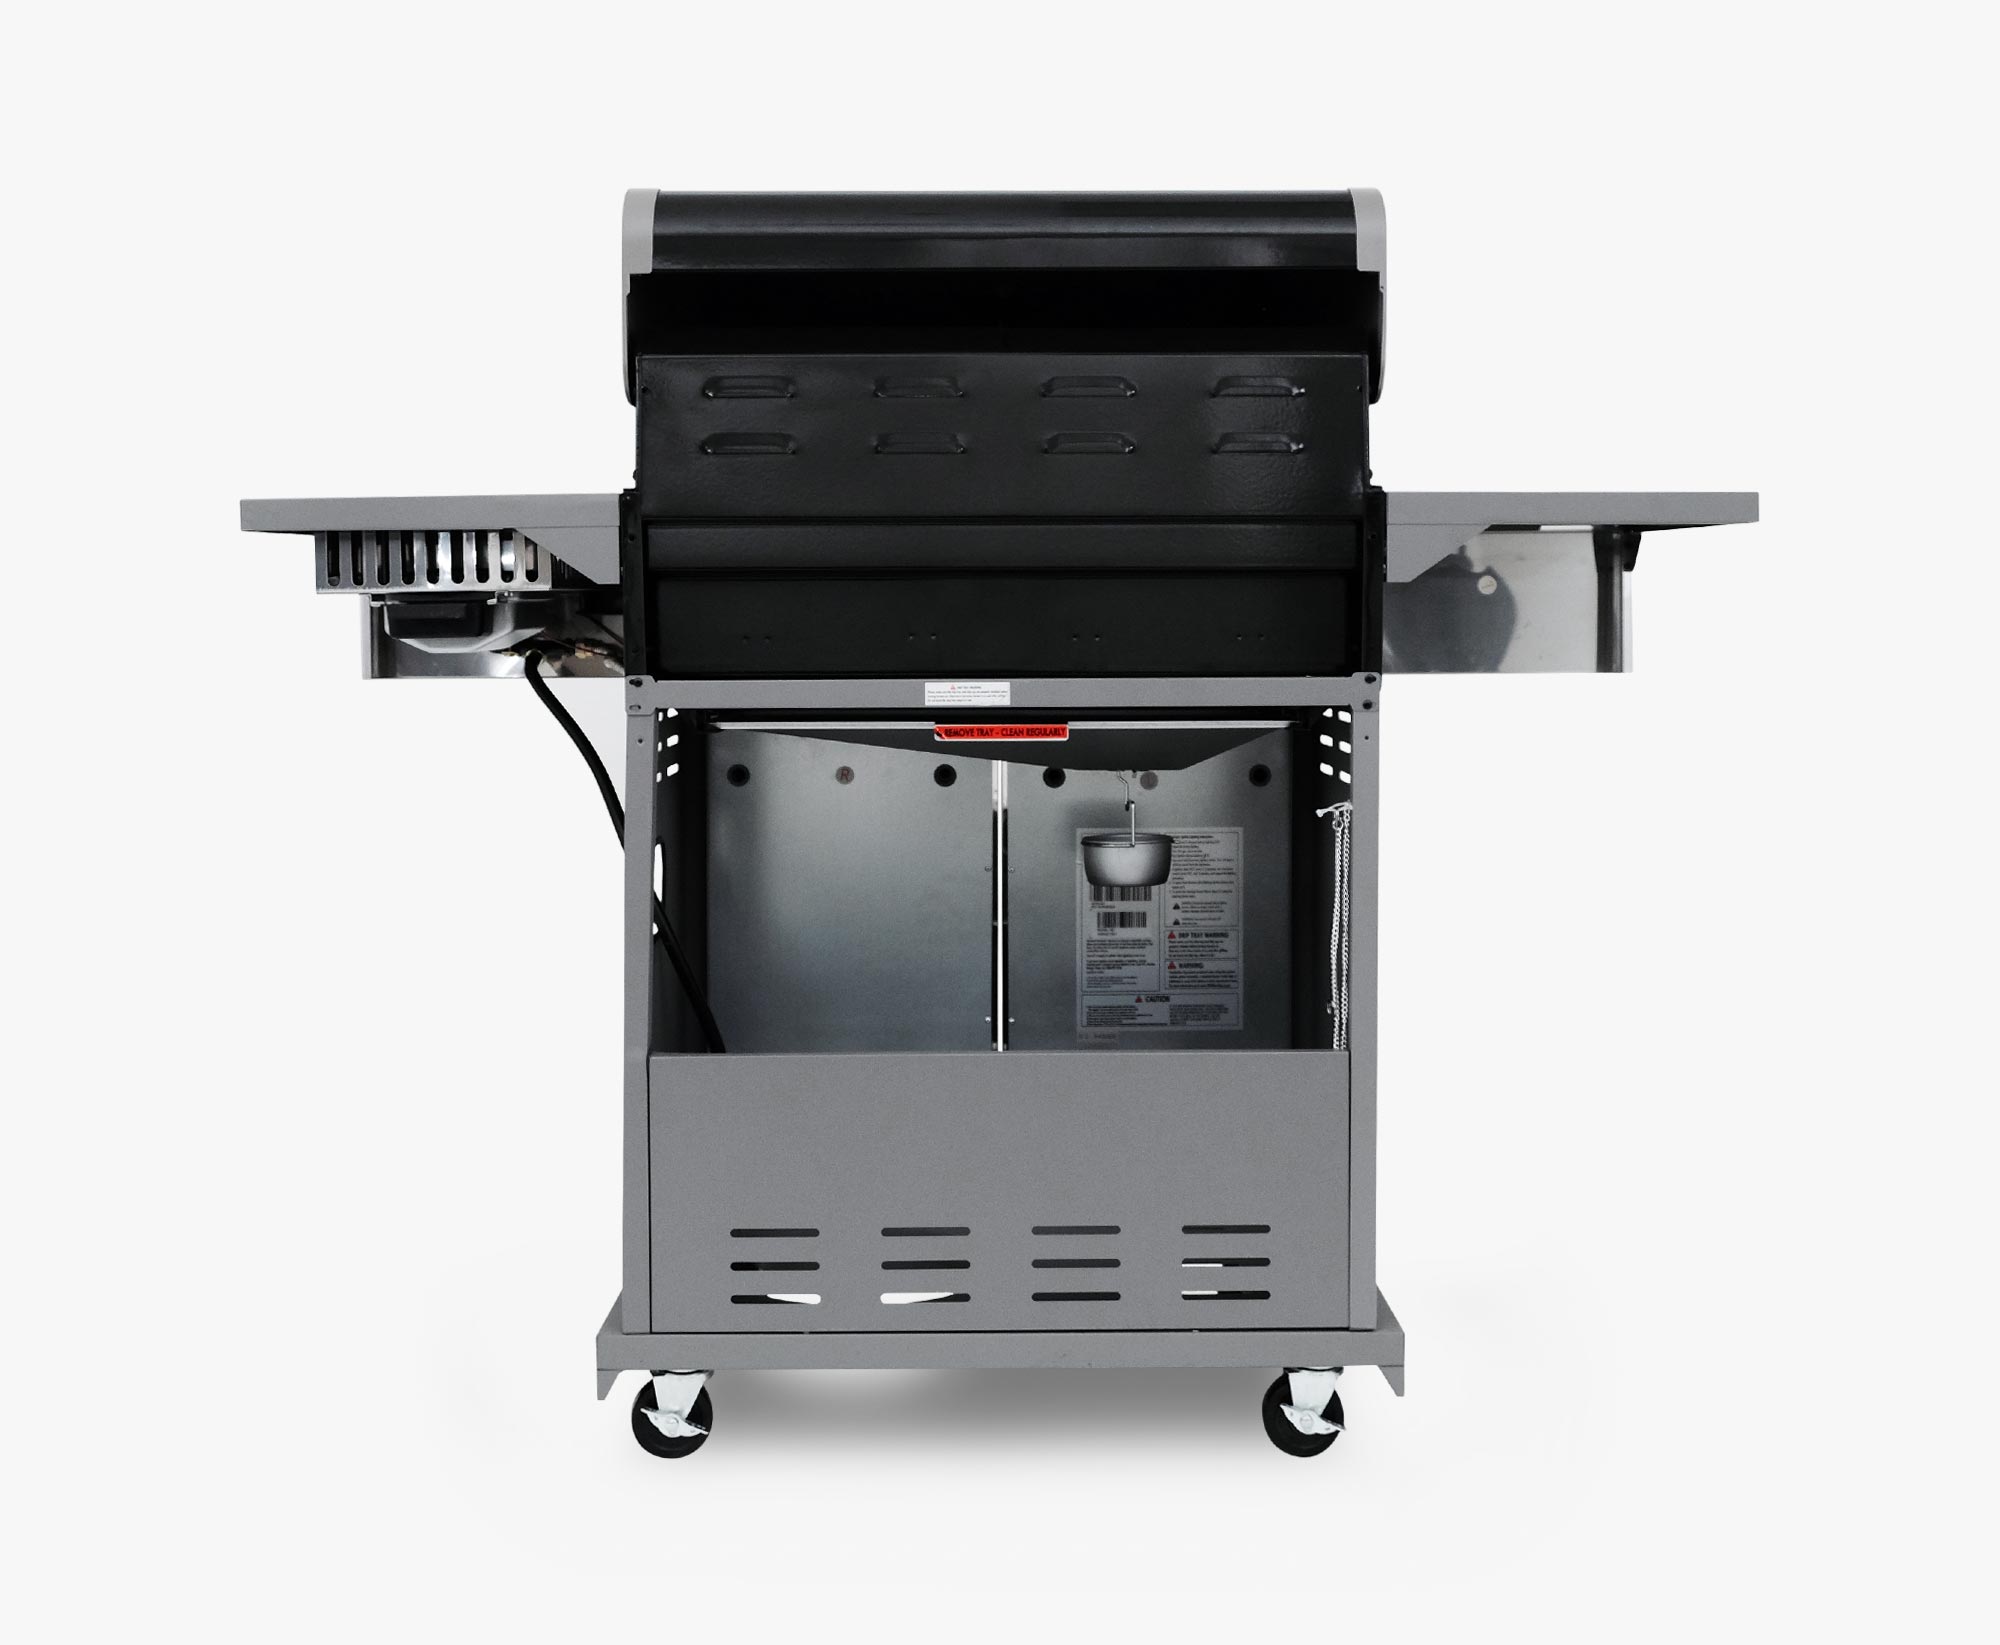 https://kenmoregrill.com/wp-content/uploads/sites/3/2022/05/product-image-kenmore-4-burner-gas-grill-with-side-searing-burner-PG-40409S0LB-stainless-steel-with-black-5.jpg